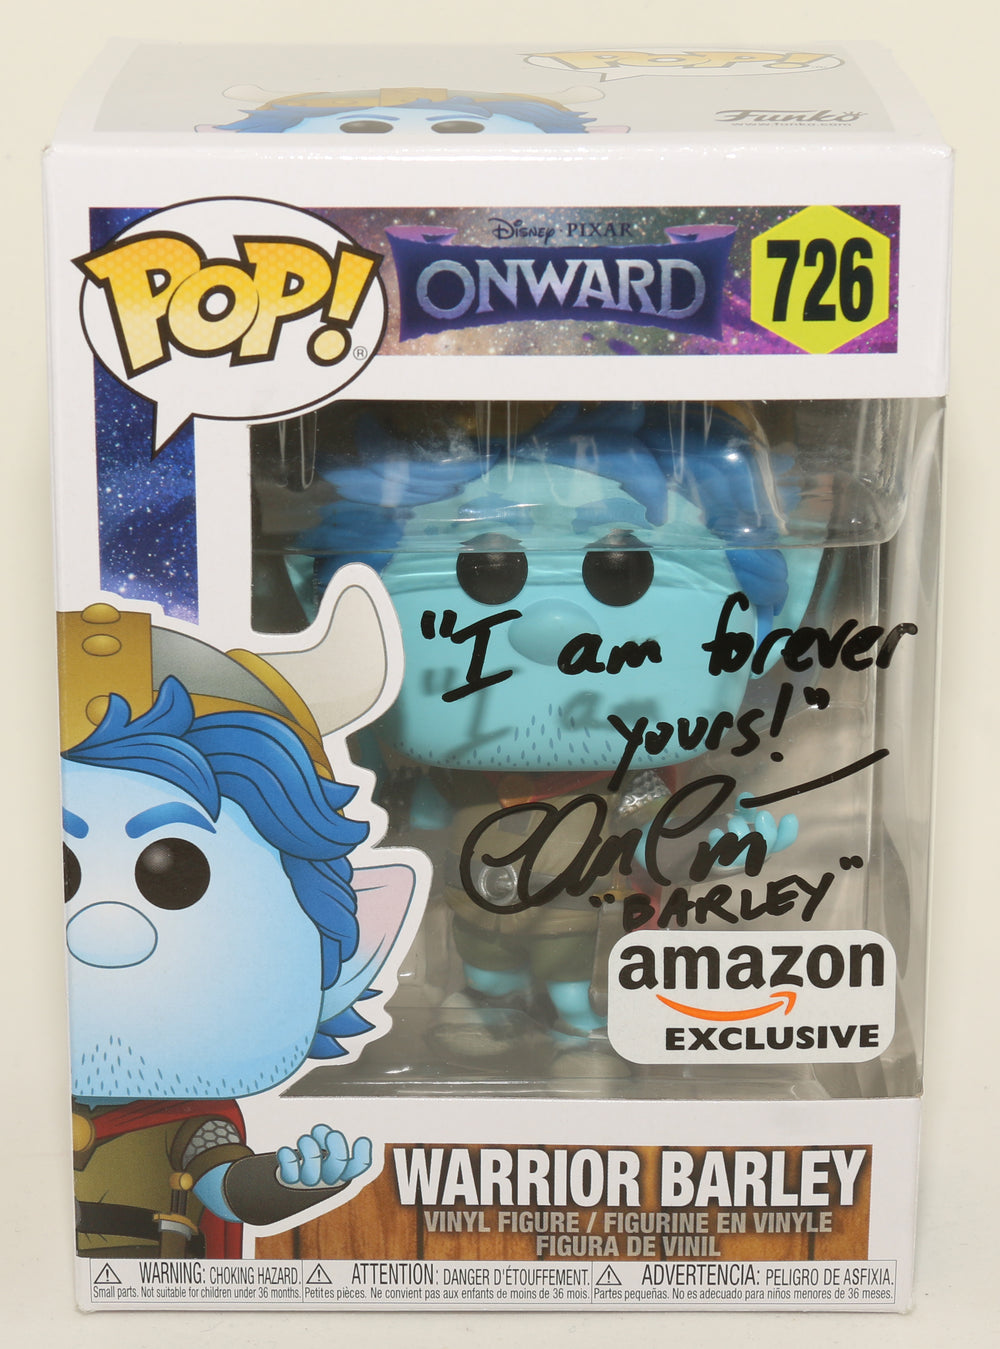 Chris Pratt as Warrior Barley in Pixar's Onward (SWAU) Signed POP! Funko with Quote and Character Name